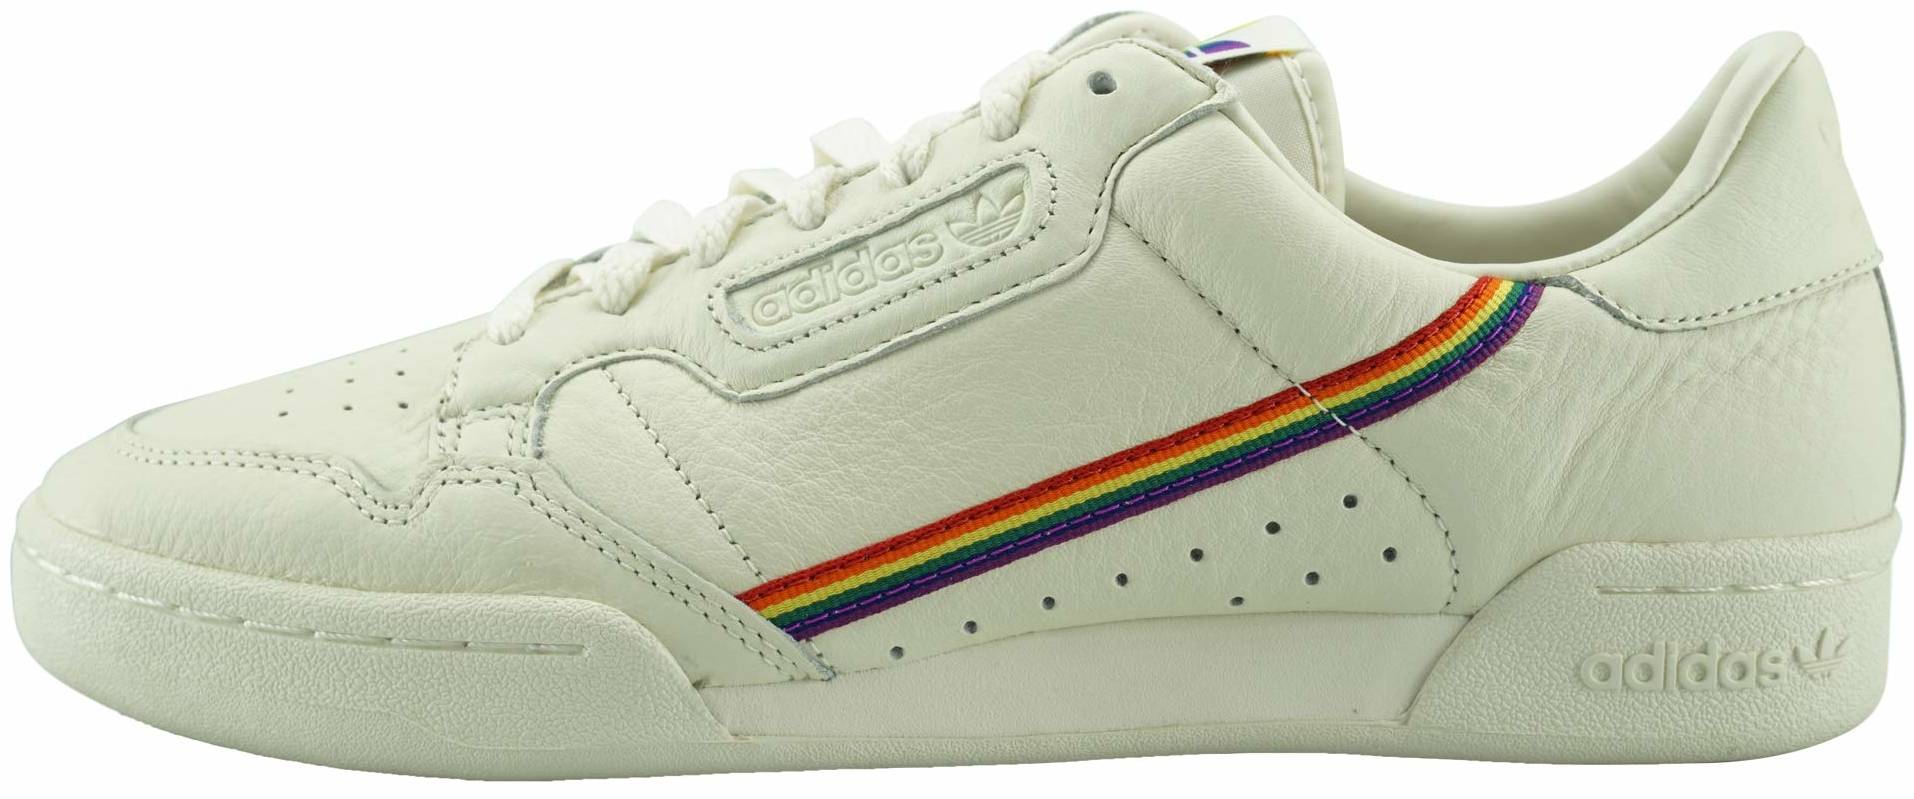 aesthetic pea refugees Adidas Continental 80 Pride sneakers in white | RunRepeat